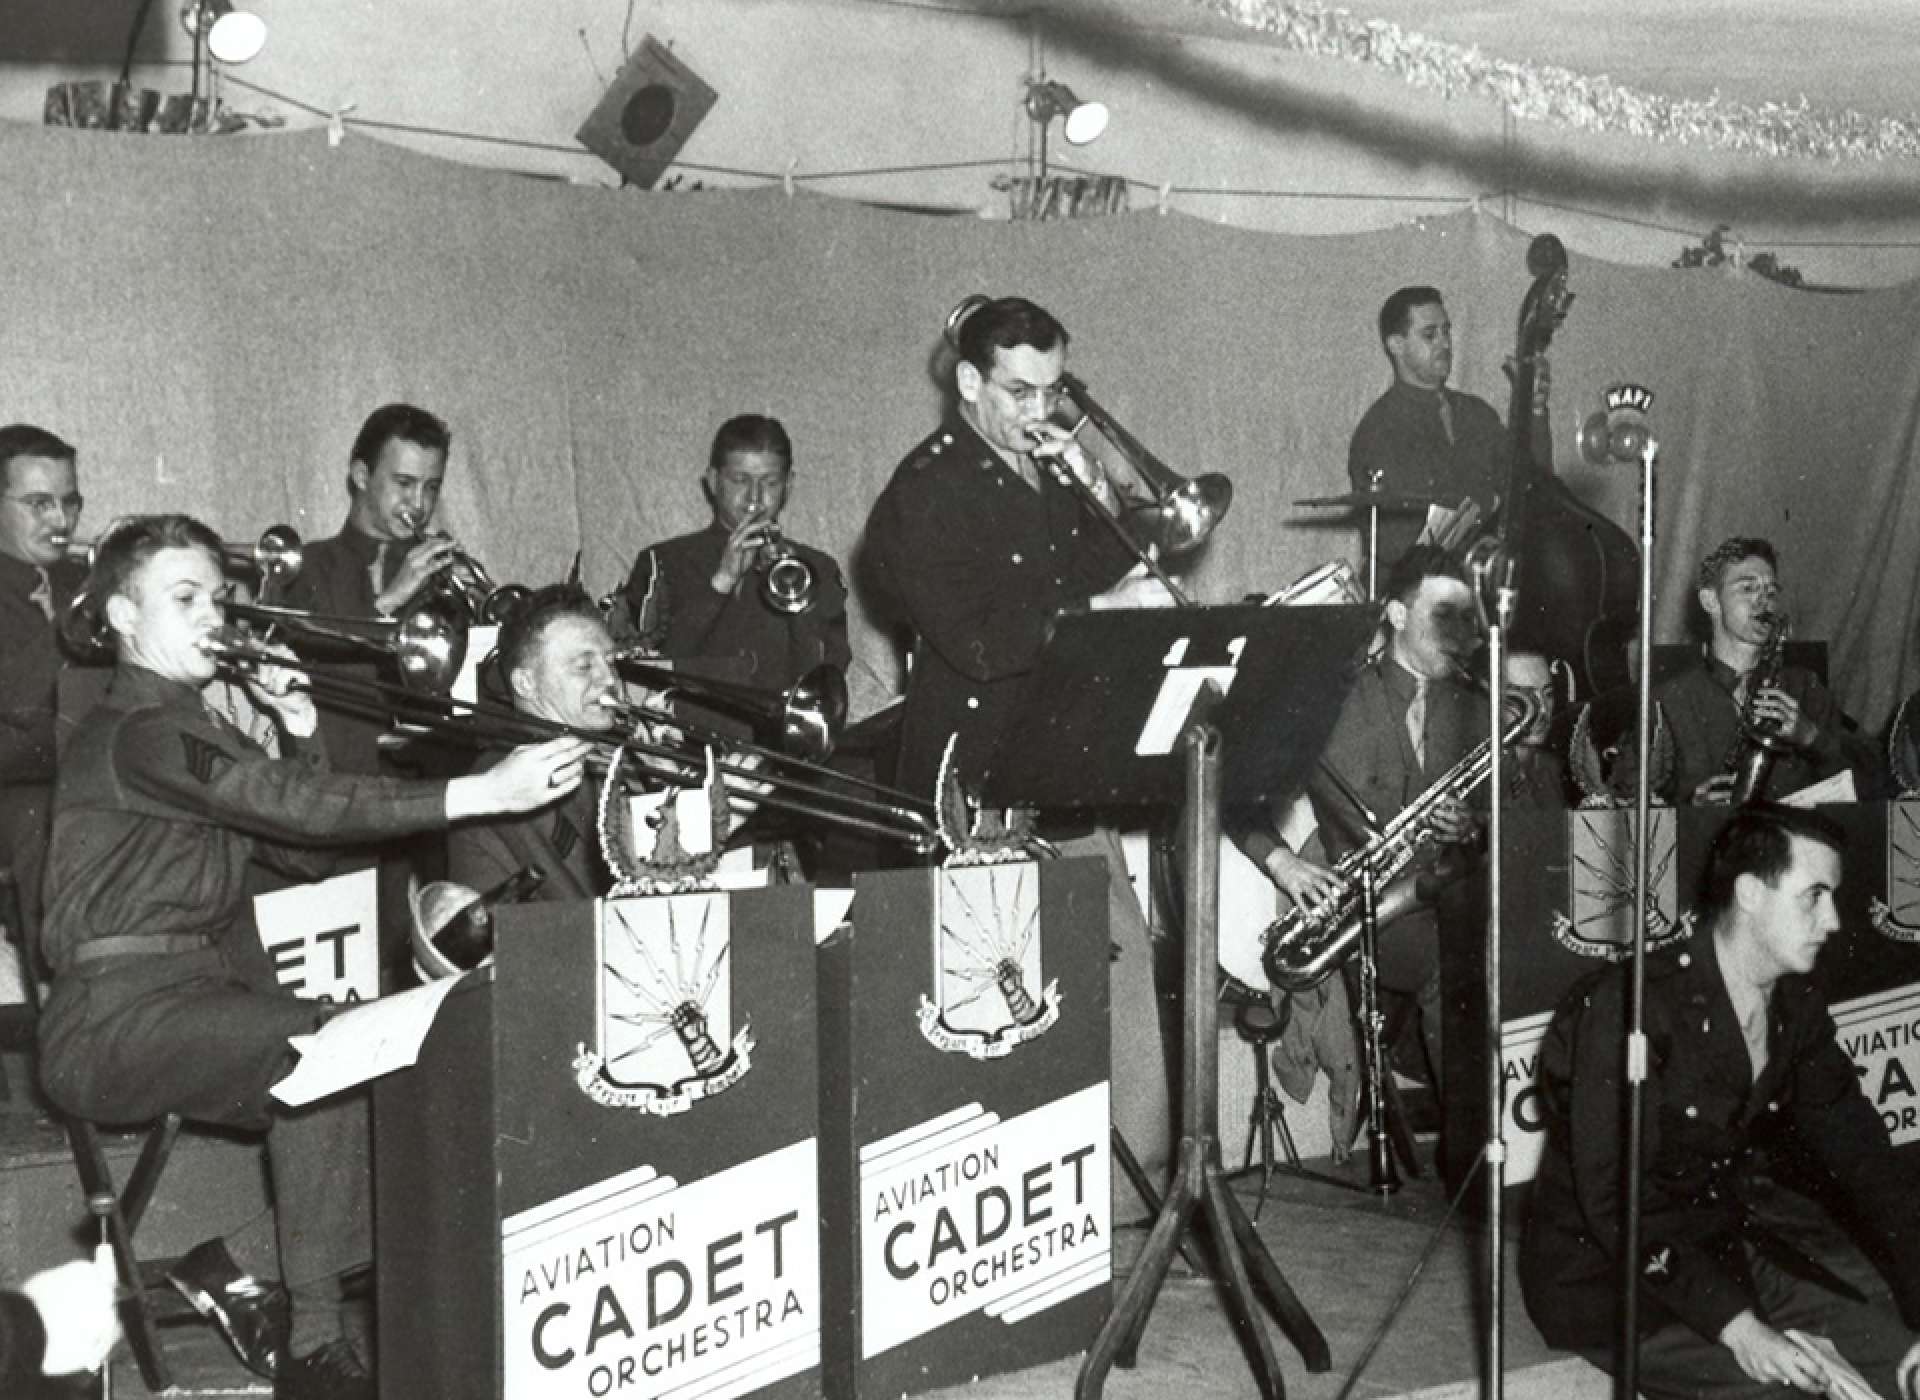 Miller (standing, center) plays the trombone with one of his early USAAF bands at Christmas, 1942. US Air Force photograph.